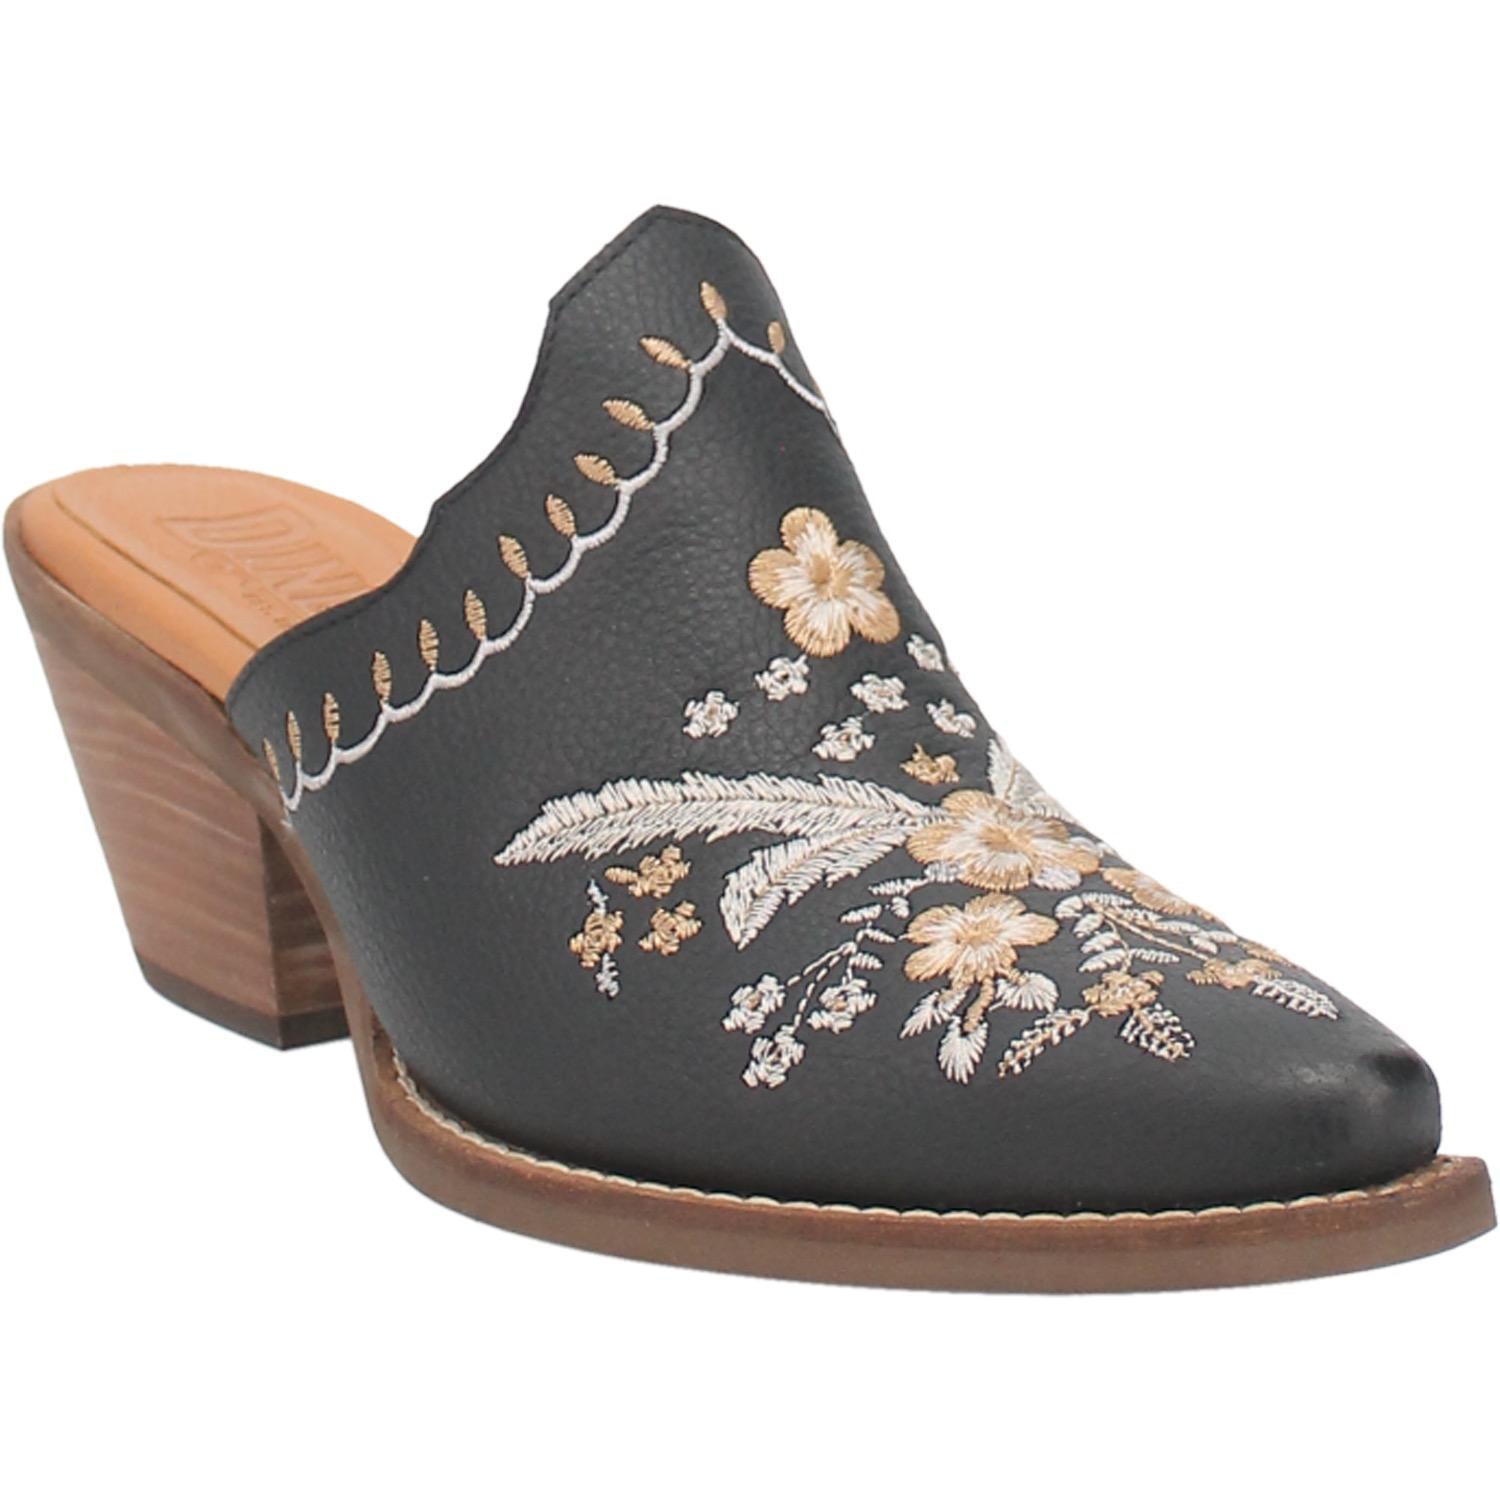 A black bootie with a white and cream floral and feather design on the upper, a white and cream stitched design on the edge, and a short heel